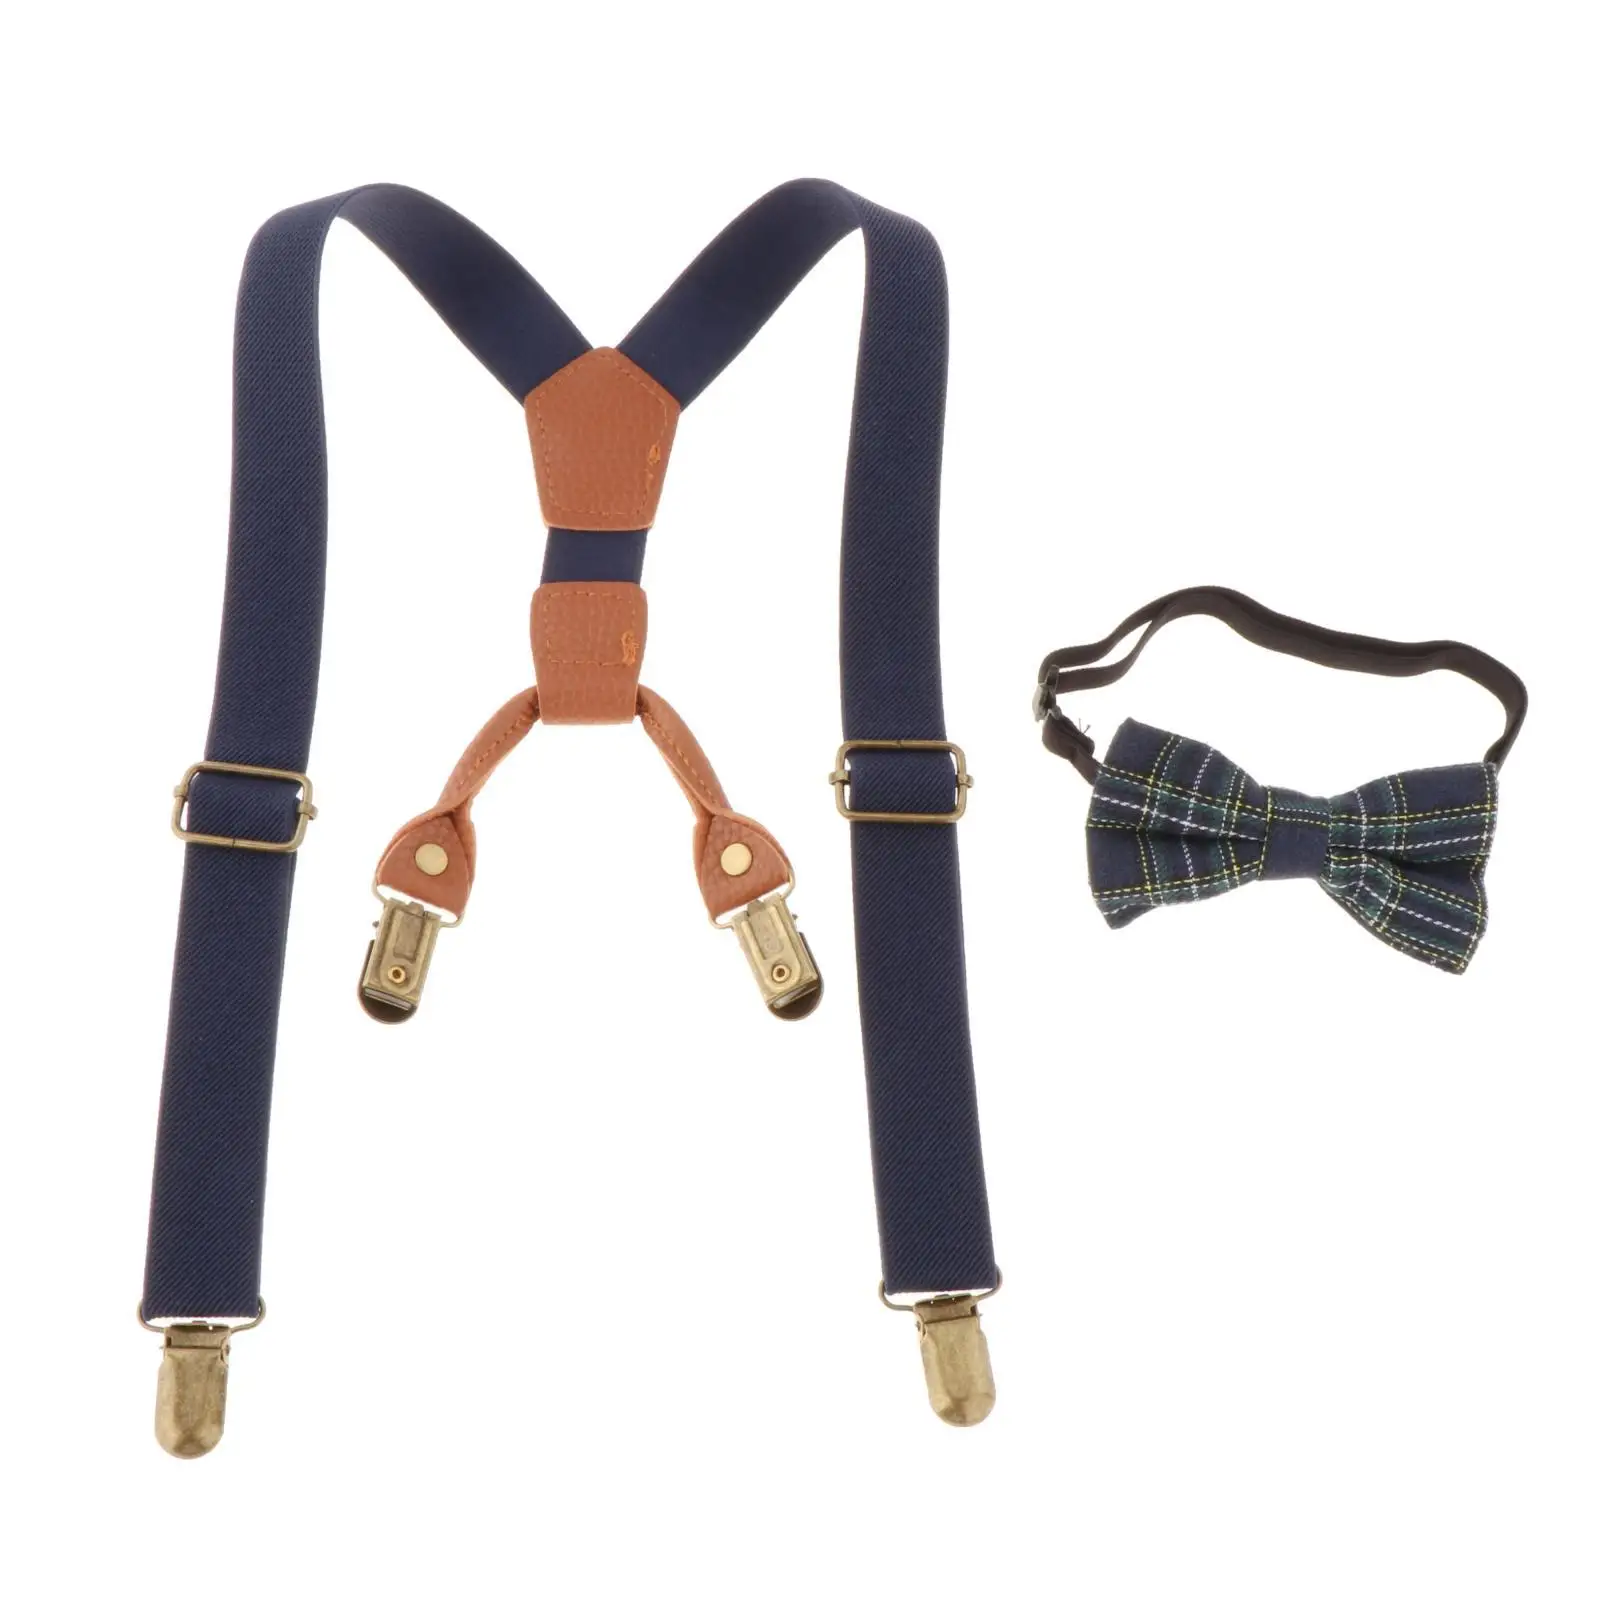 Kids Suspenders and Bow Tie Set 4 Clips Y Back Construction 1 inch Wide Elastic Straps Pants Braces for Boys and Girls Kids